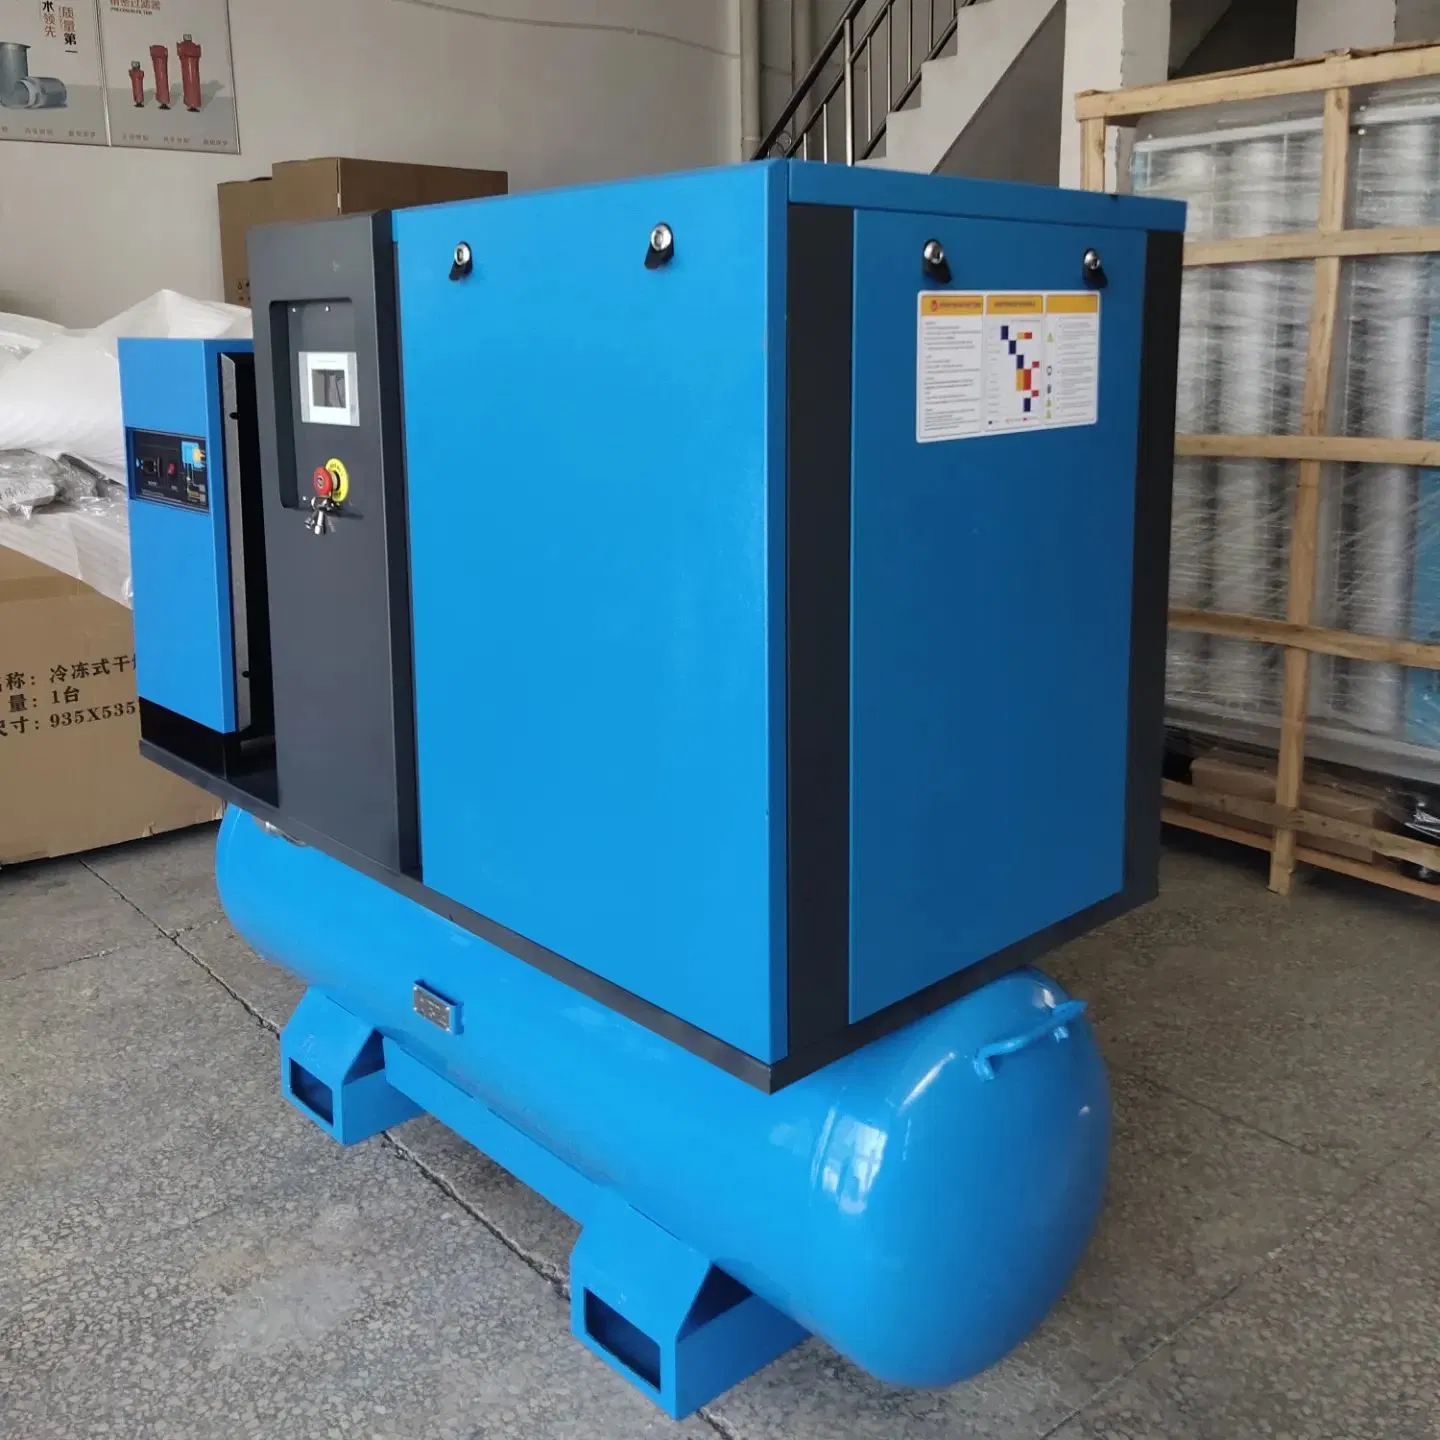 Four in One Electric Rotary Direct Drive Screw Air Compressor with Air Dryer and Air Tank 300 Liter Portable